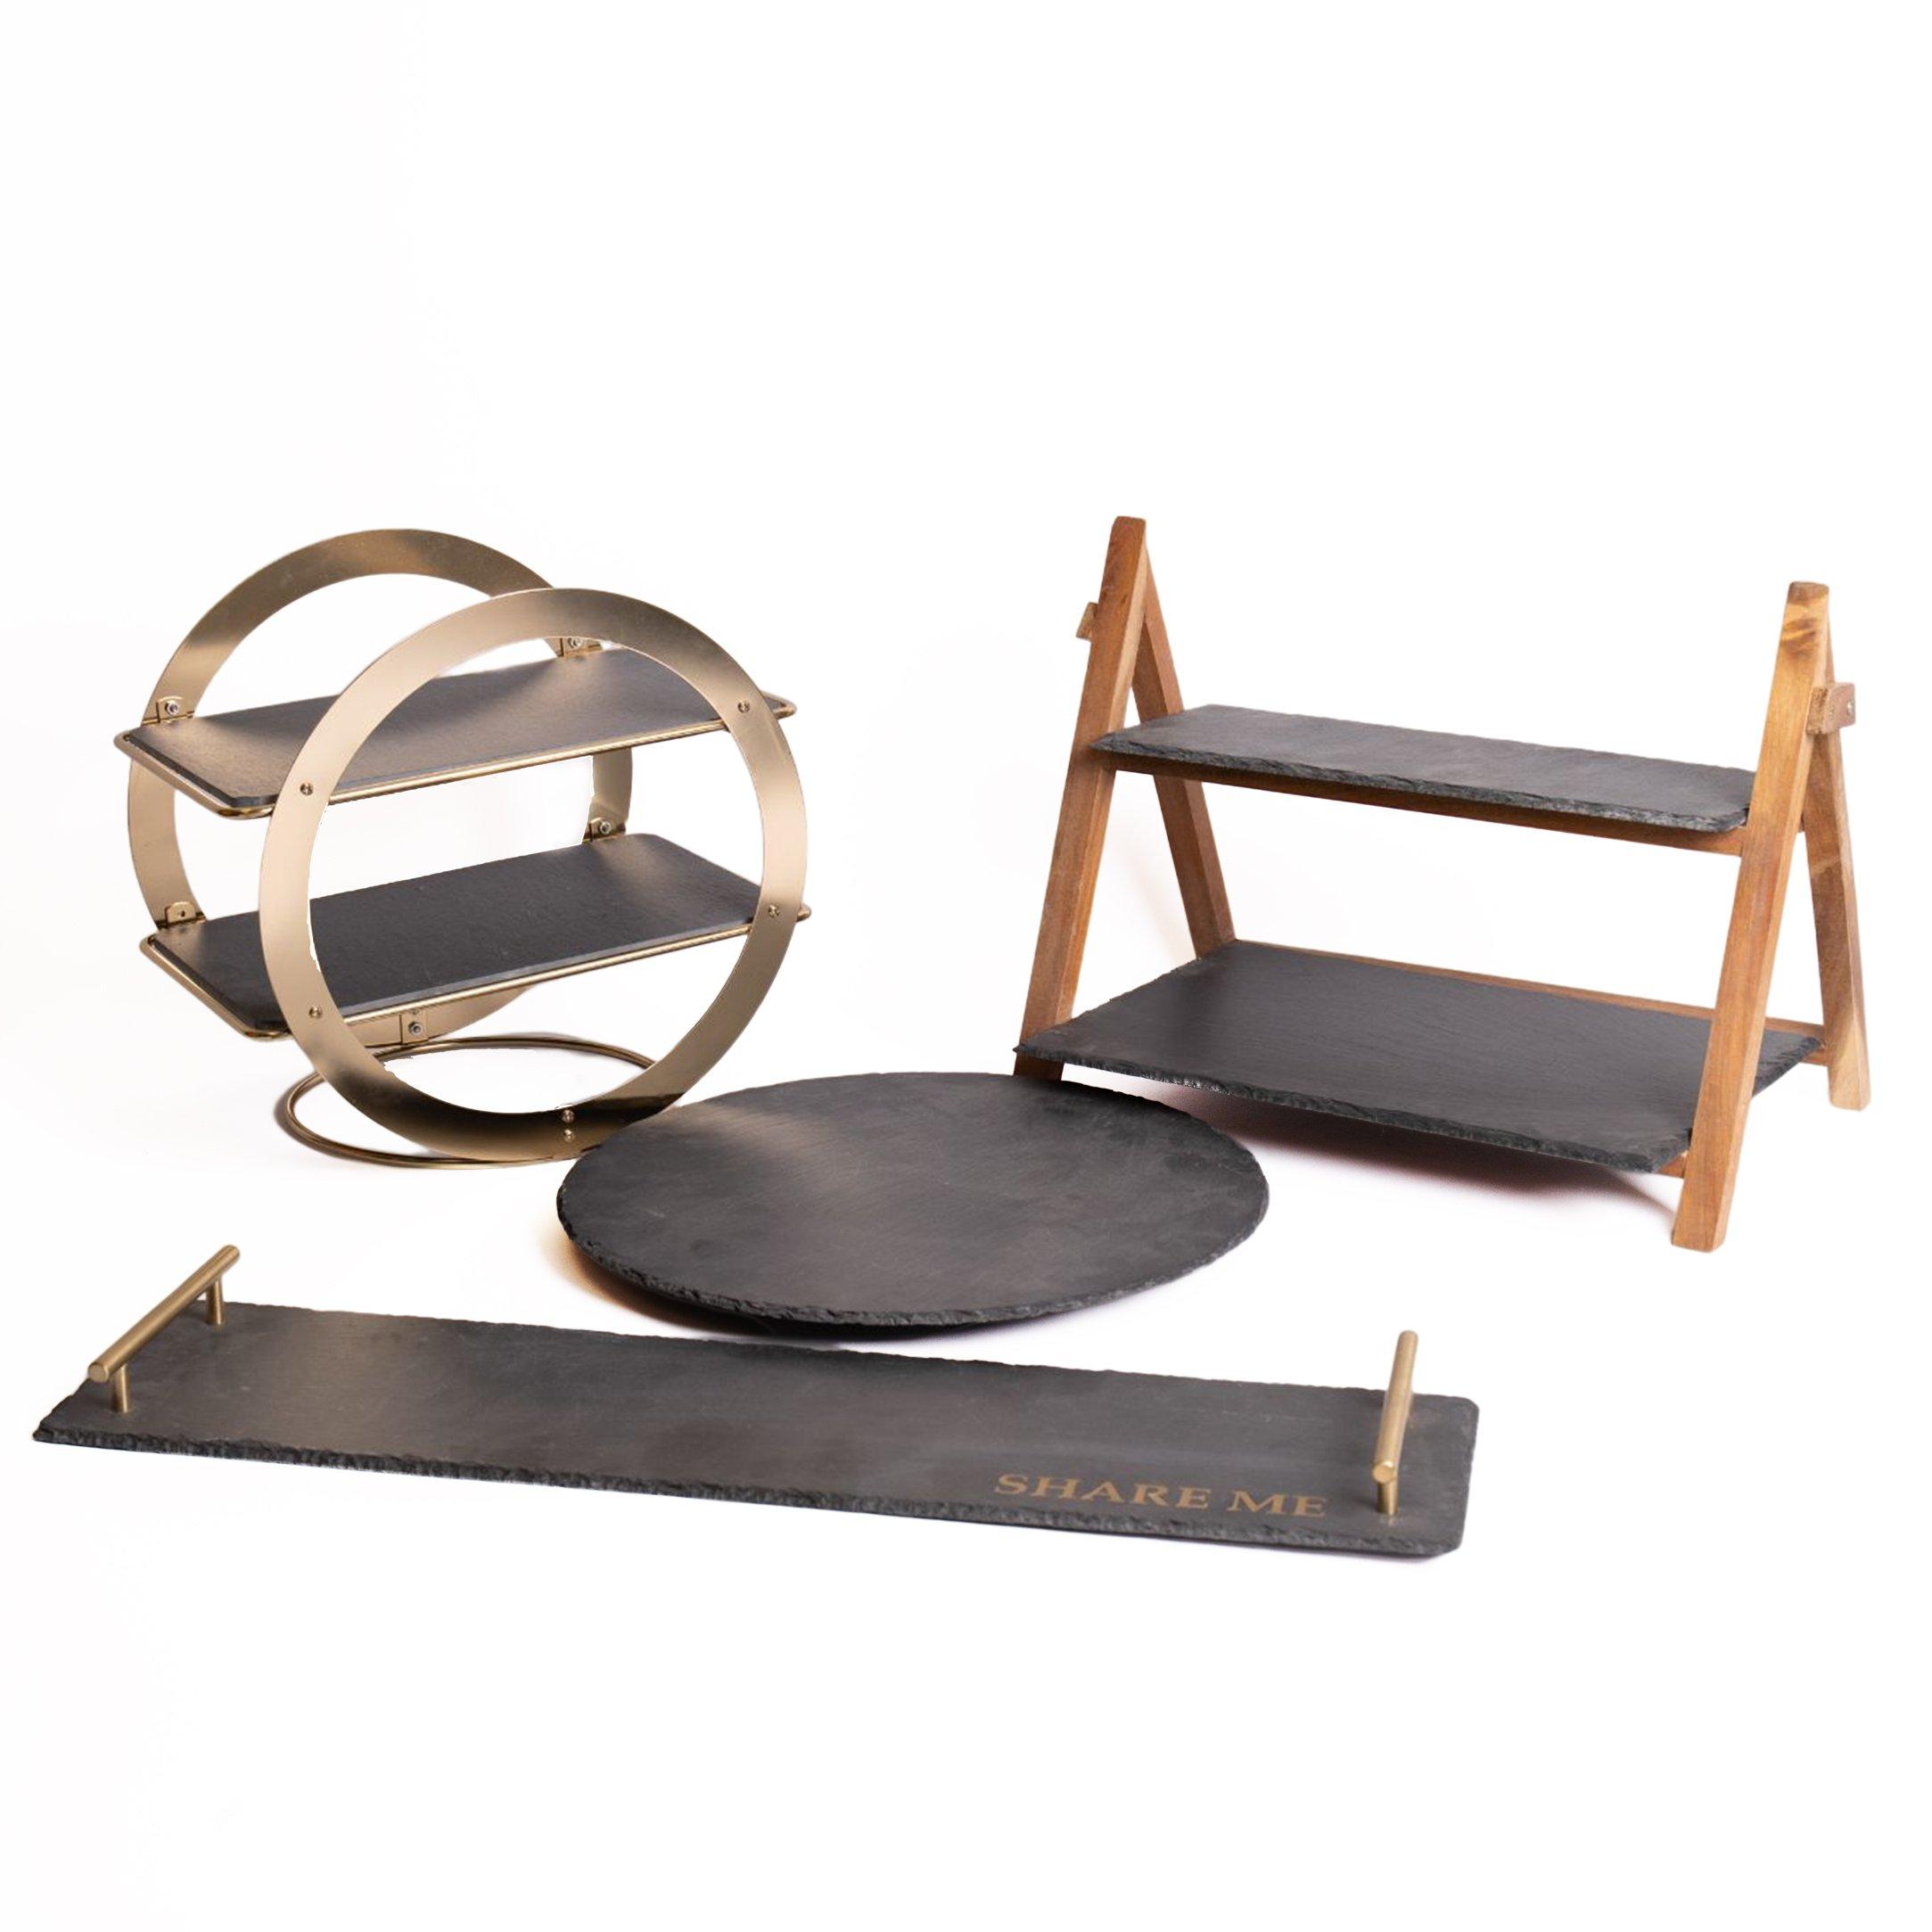 Slate Serveware Set with Geometric Serving Stand, 2-Tier Slate & Wood Stand, Platter with Brass Hand